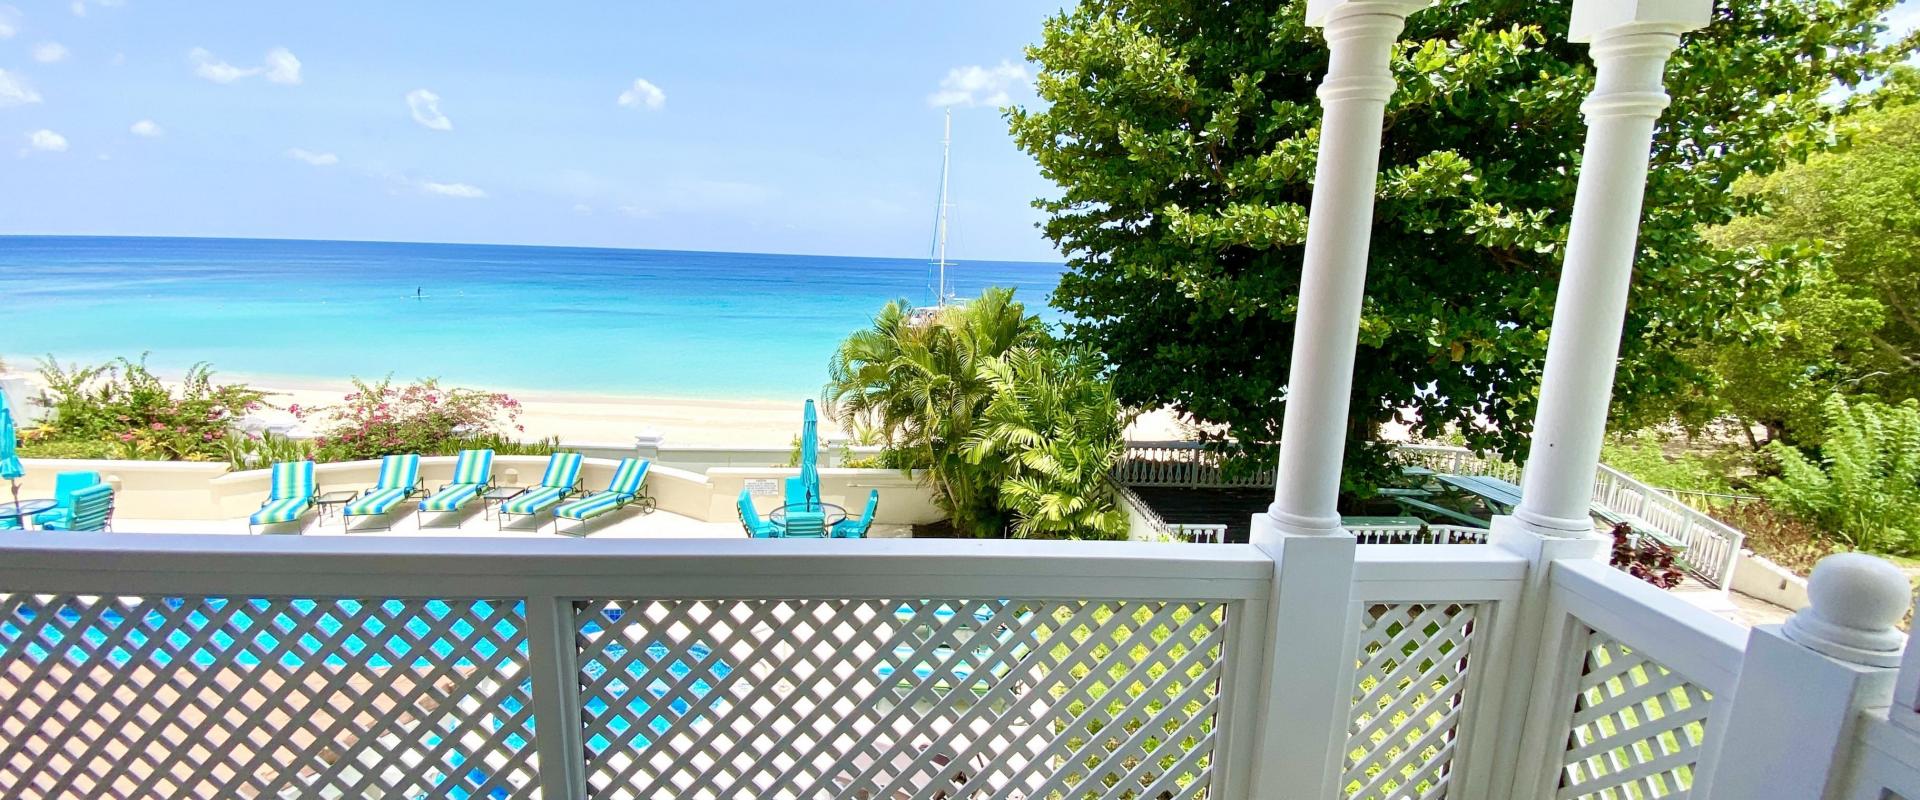 Fosters House Holiday Rental In Barbados Bedroom 3 Patio with Ocean View